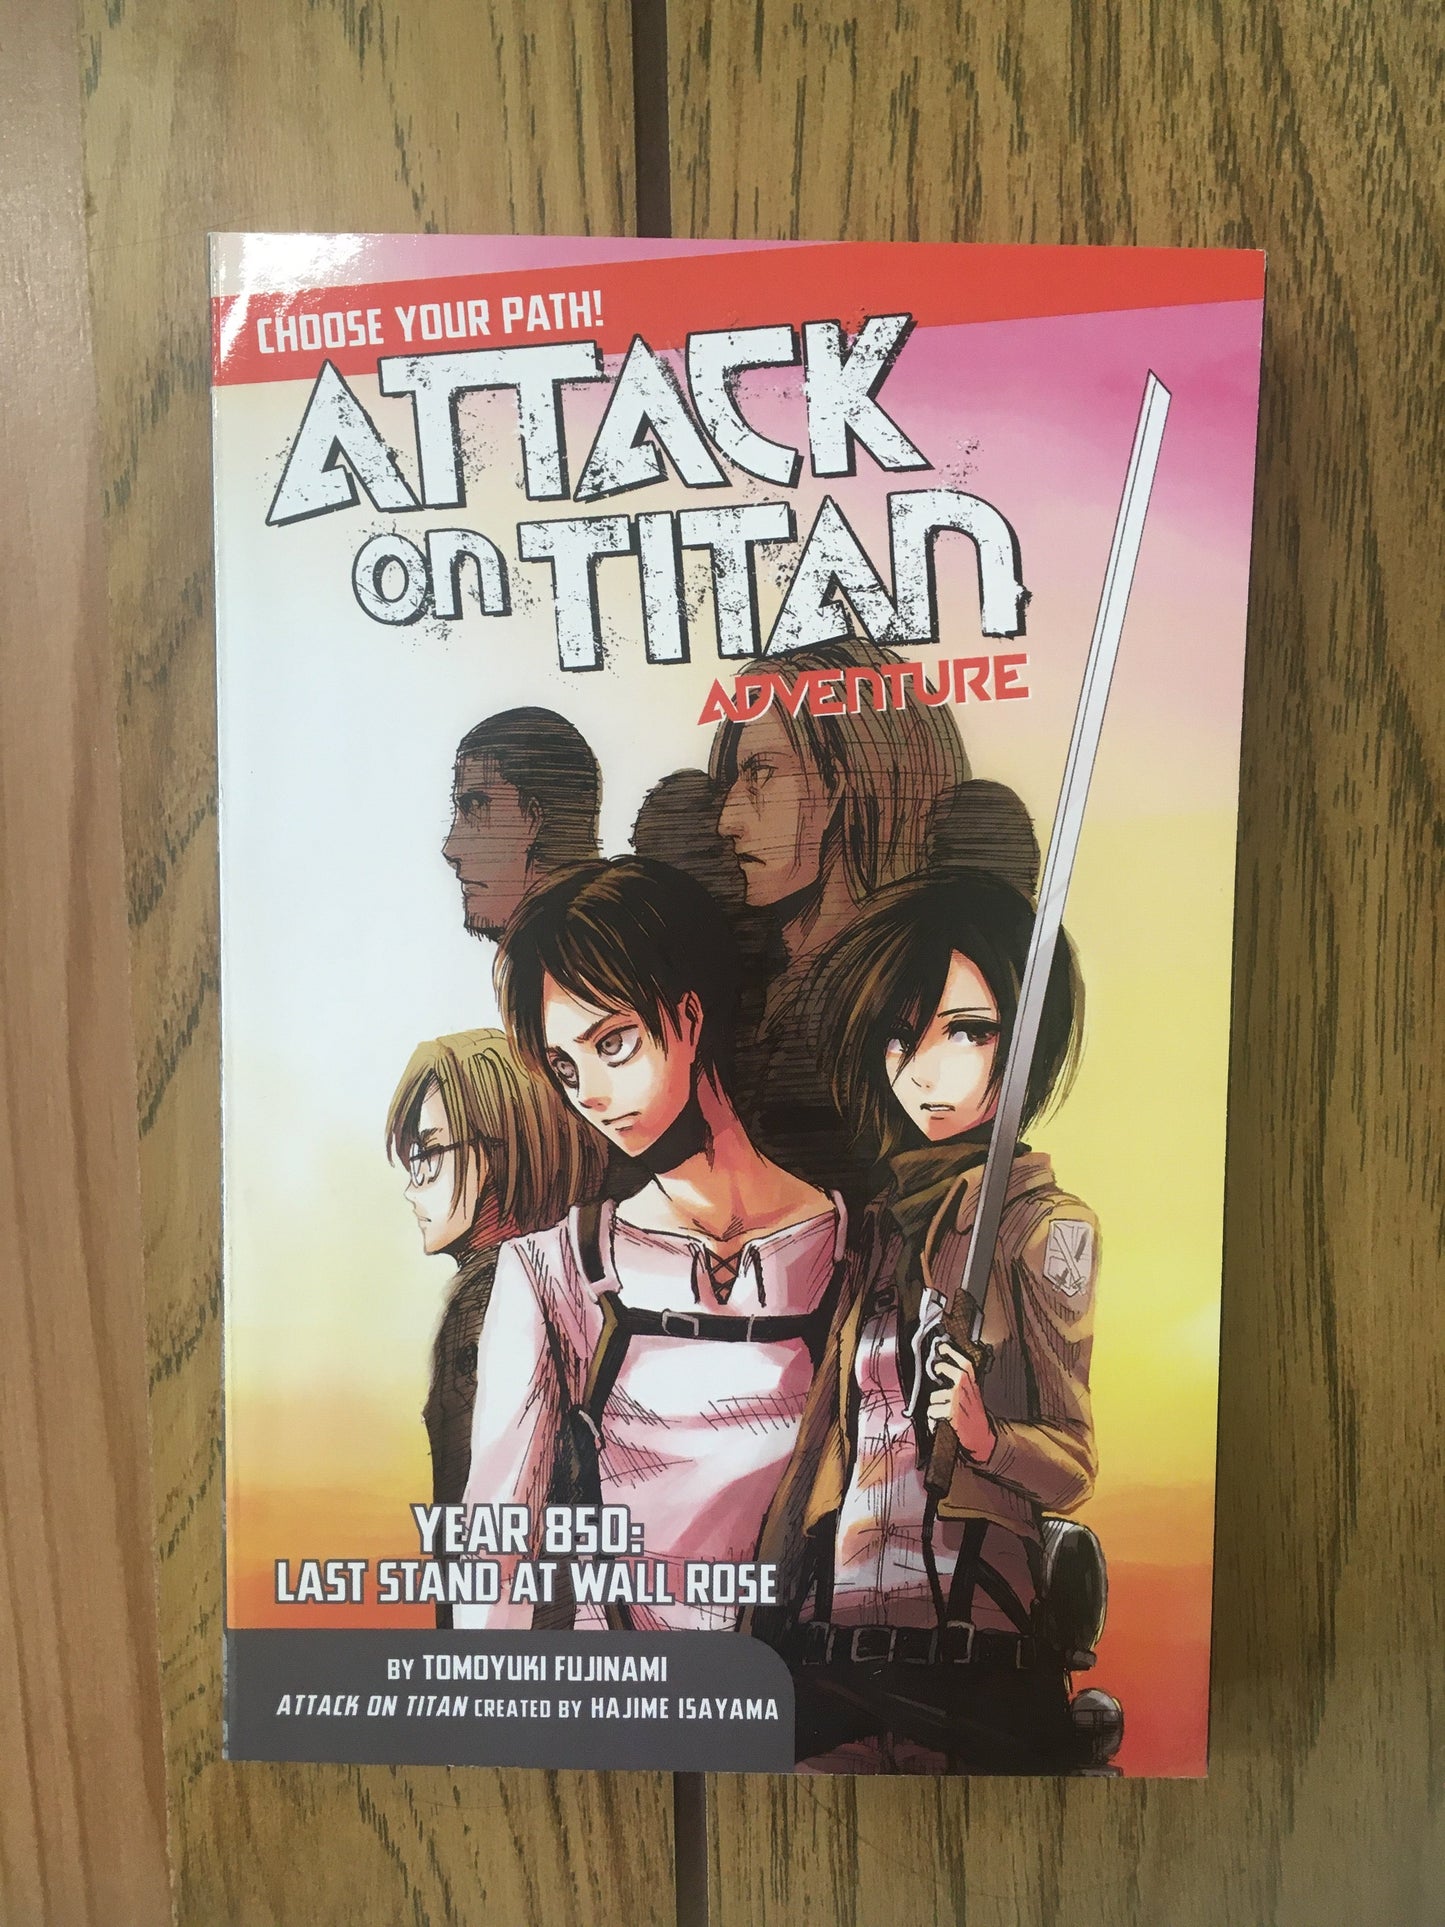 Attack on Titan Choose Your Path Adventure: Year 850: Last Stand At Wall Rose